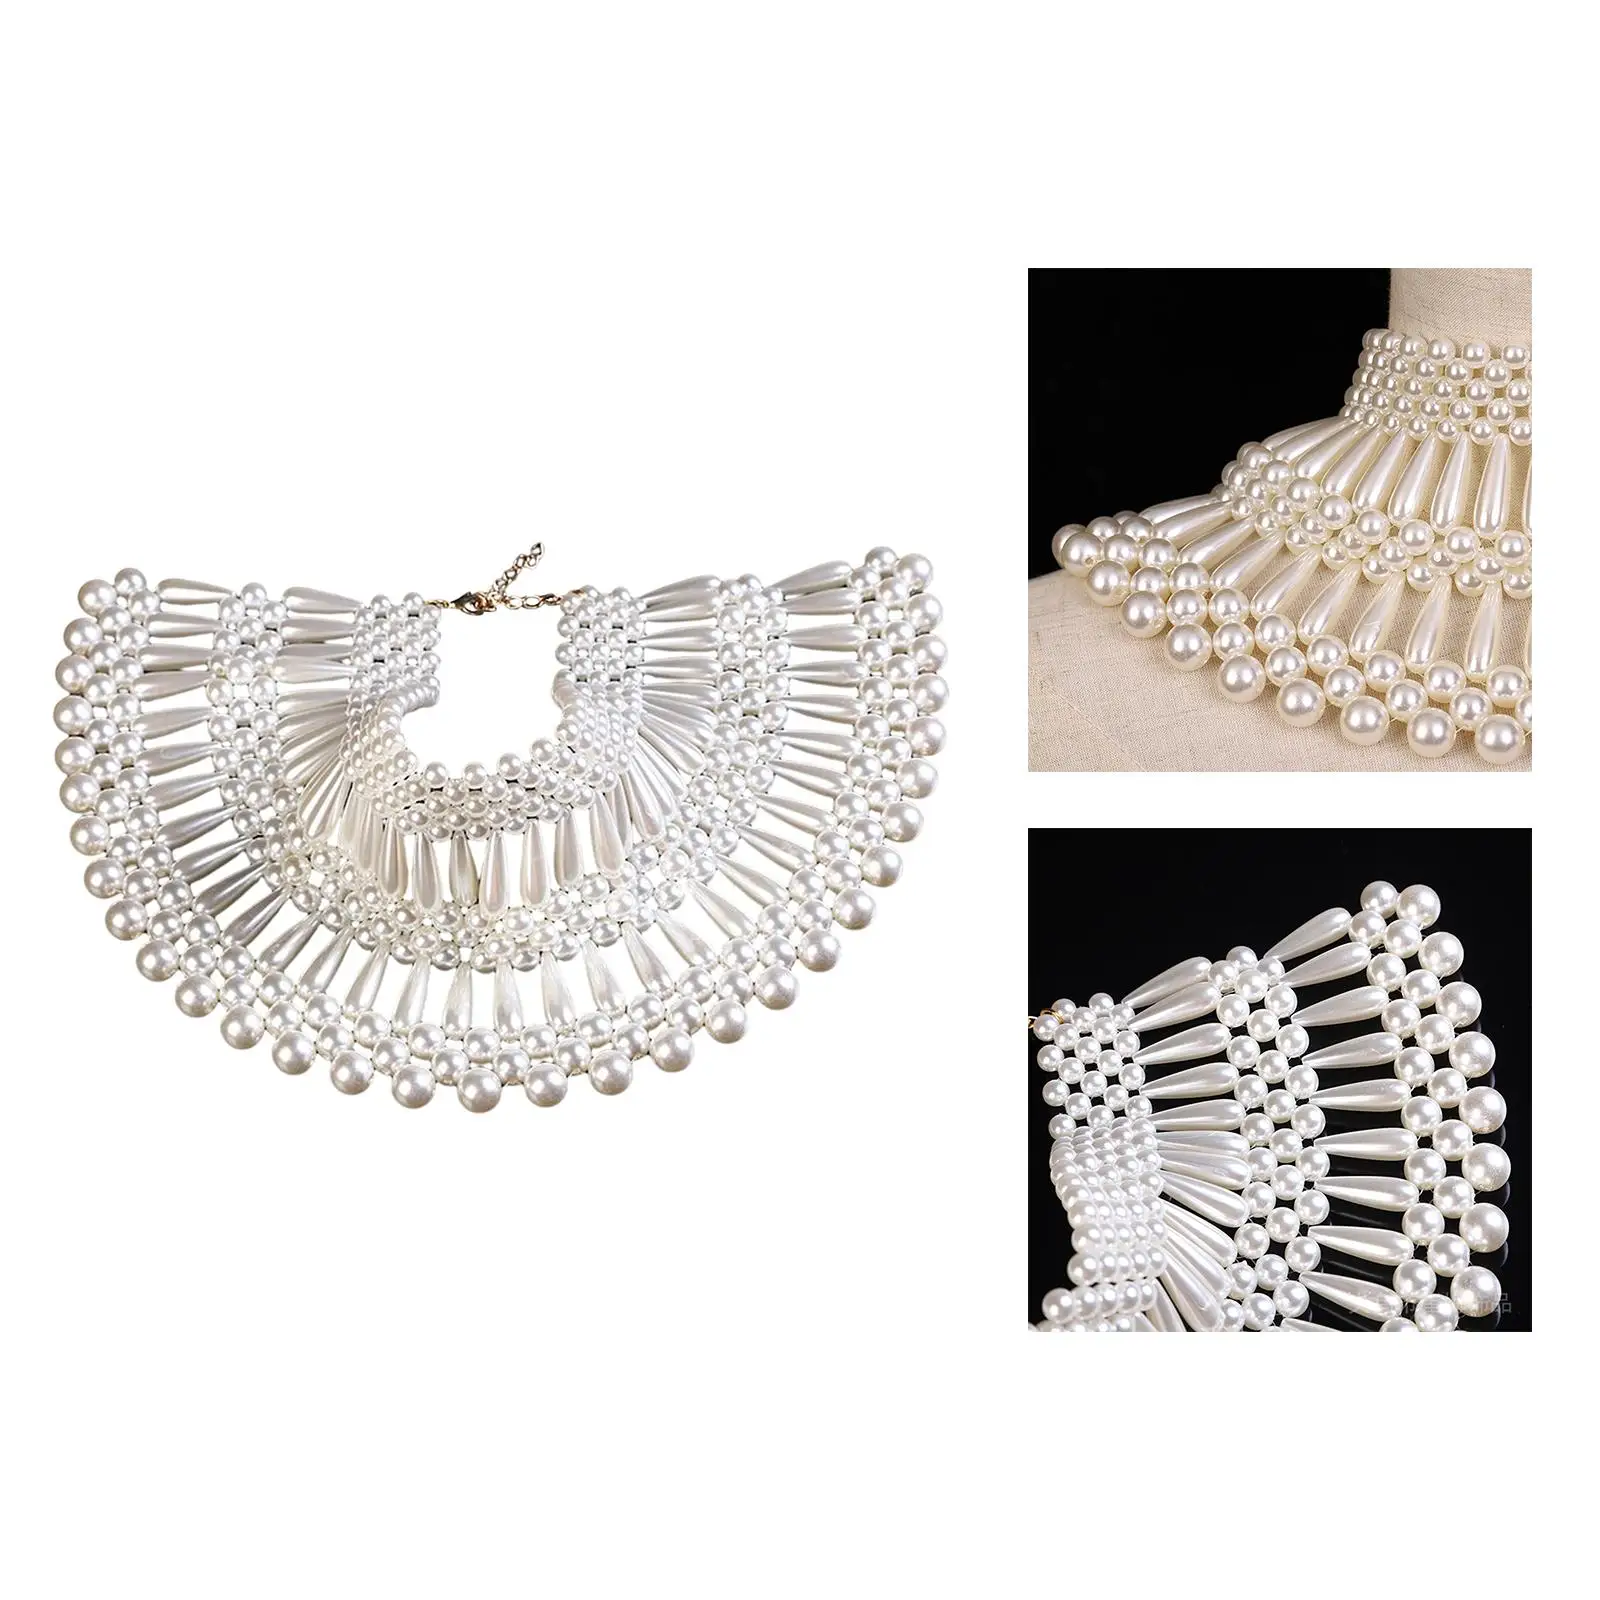 Imitation Pearl Necklace Bib Choker Necklace Jewelry for Dress Wedding Party Costume Accessories